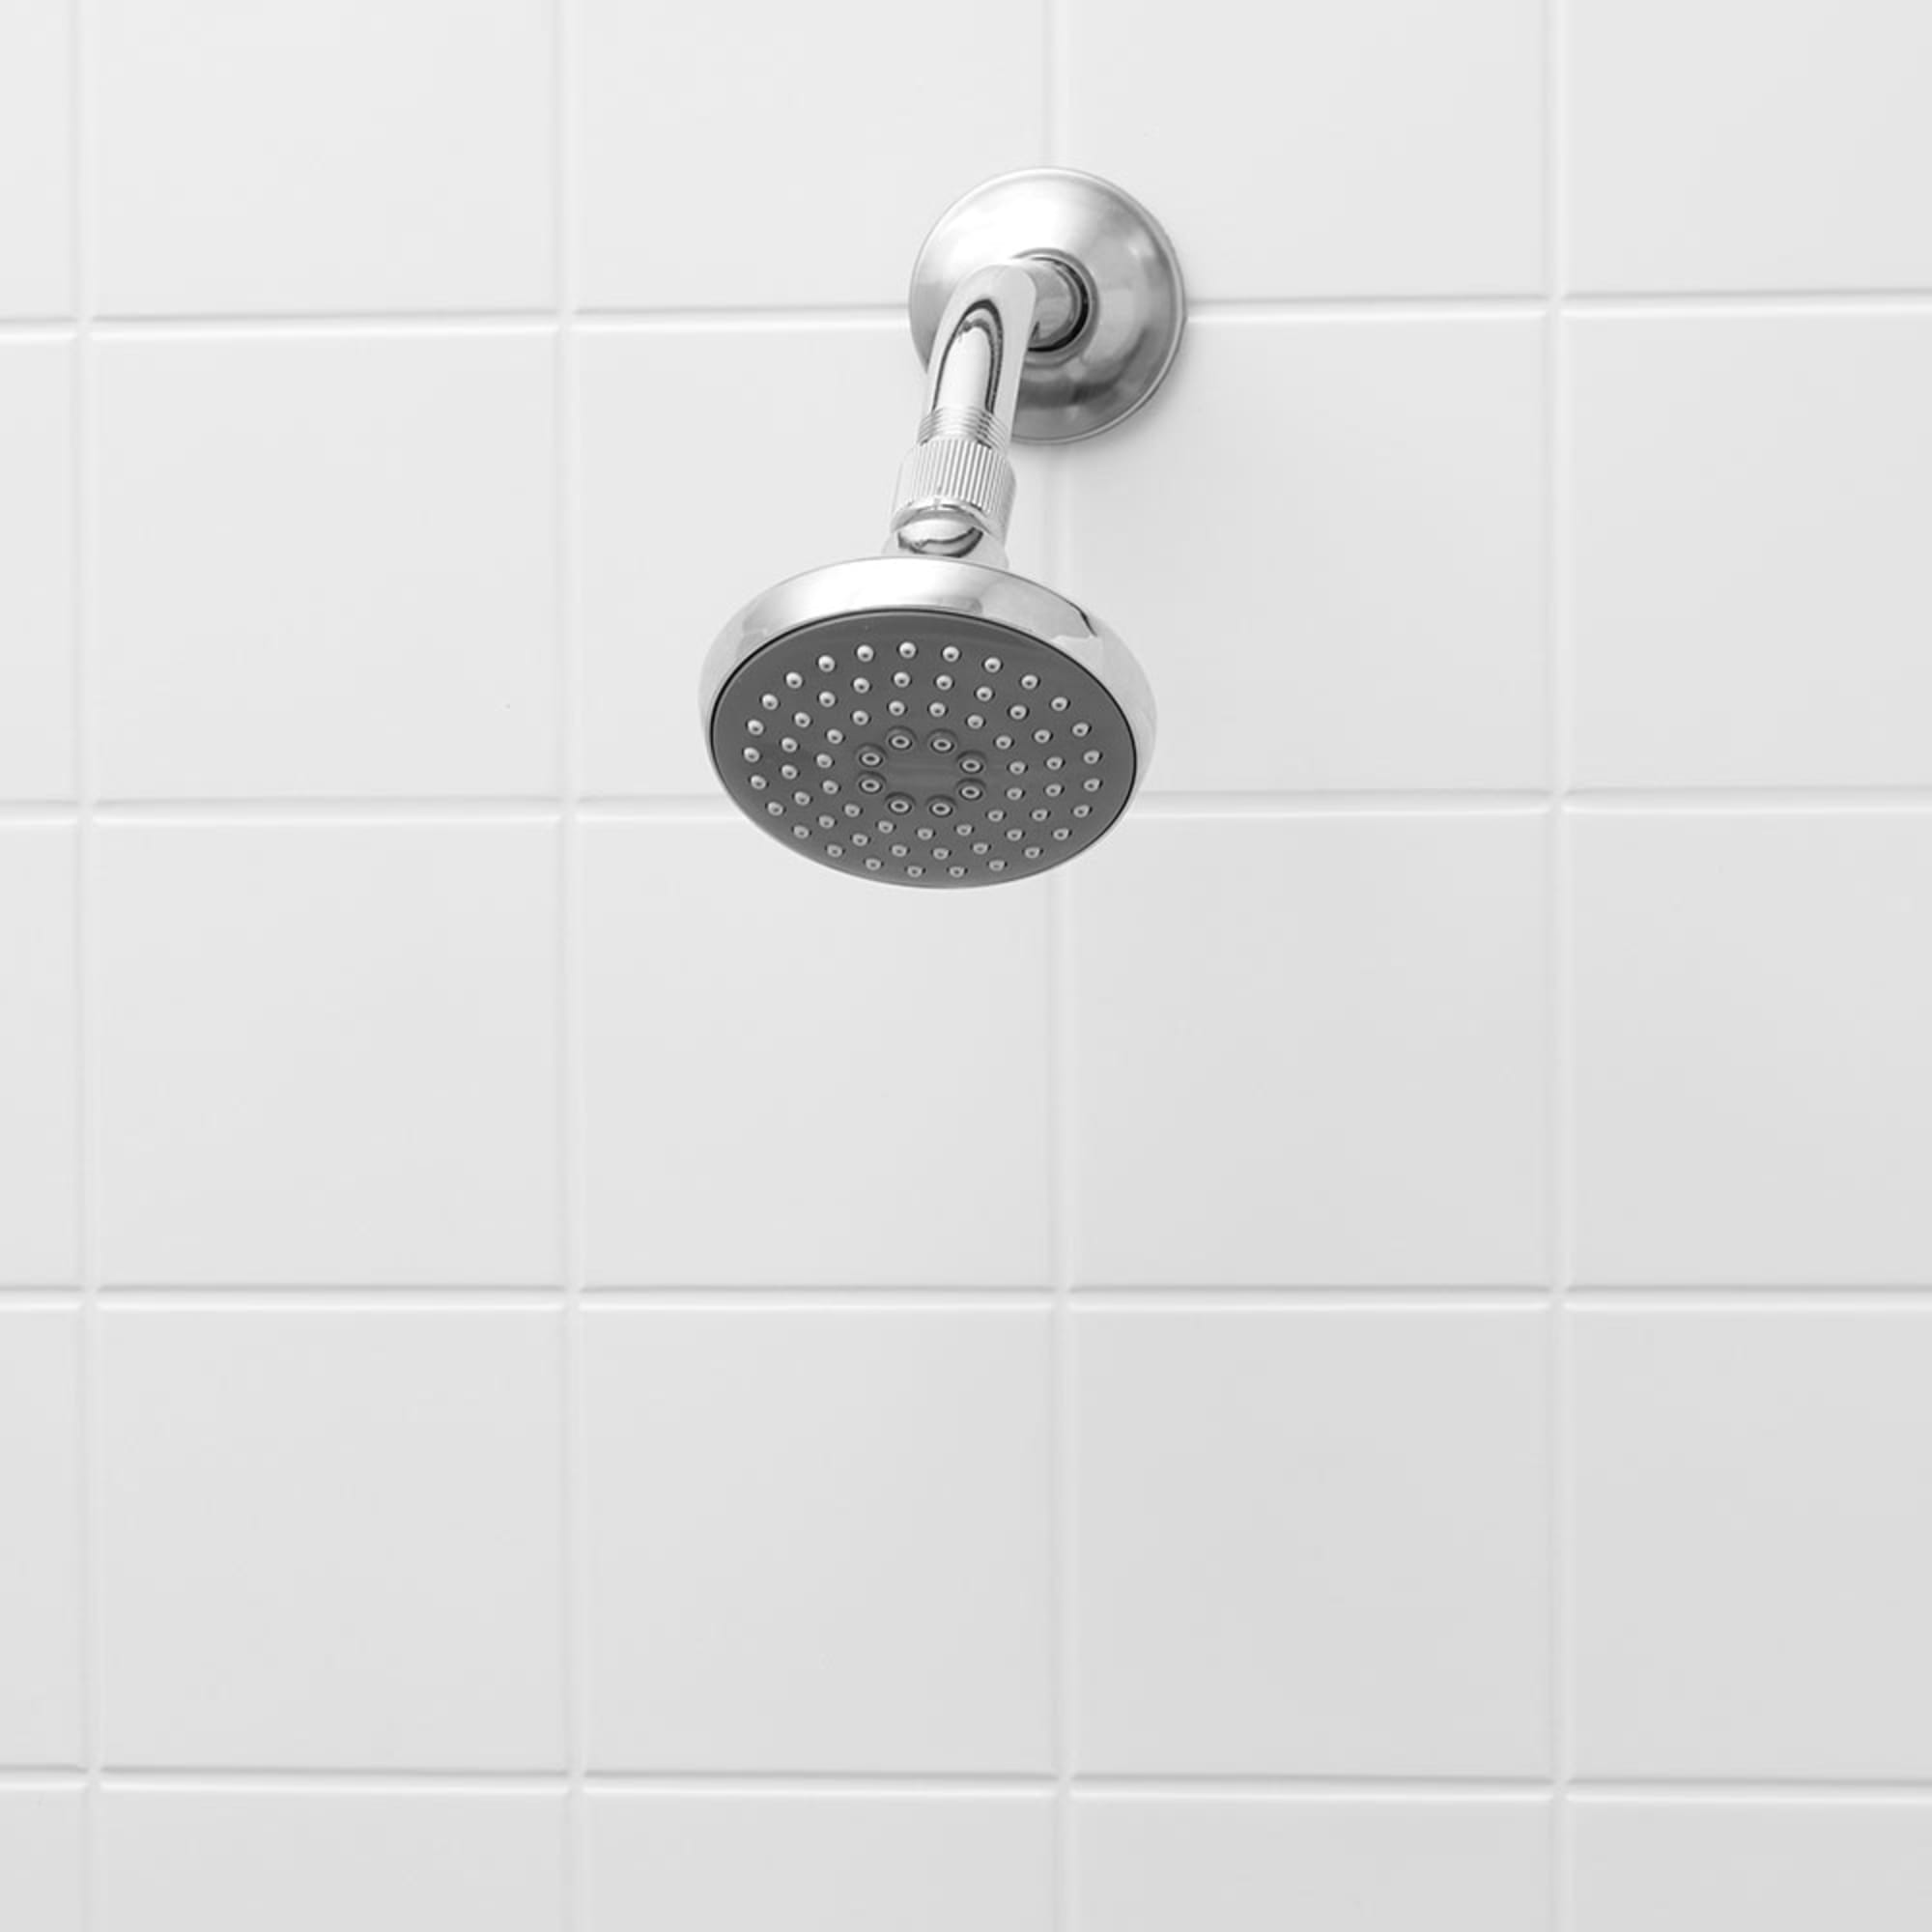 Home Basics 5" Single Function Wall Mounted Shower Head, Chrome $5.00 EACH, CASE PACK OF 12